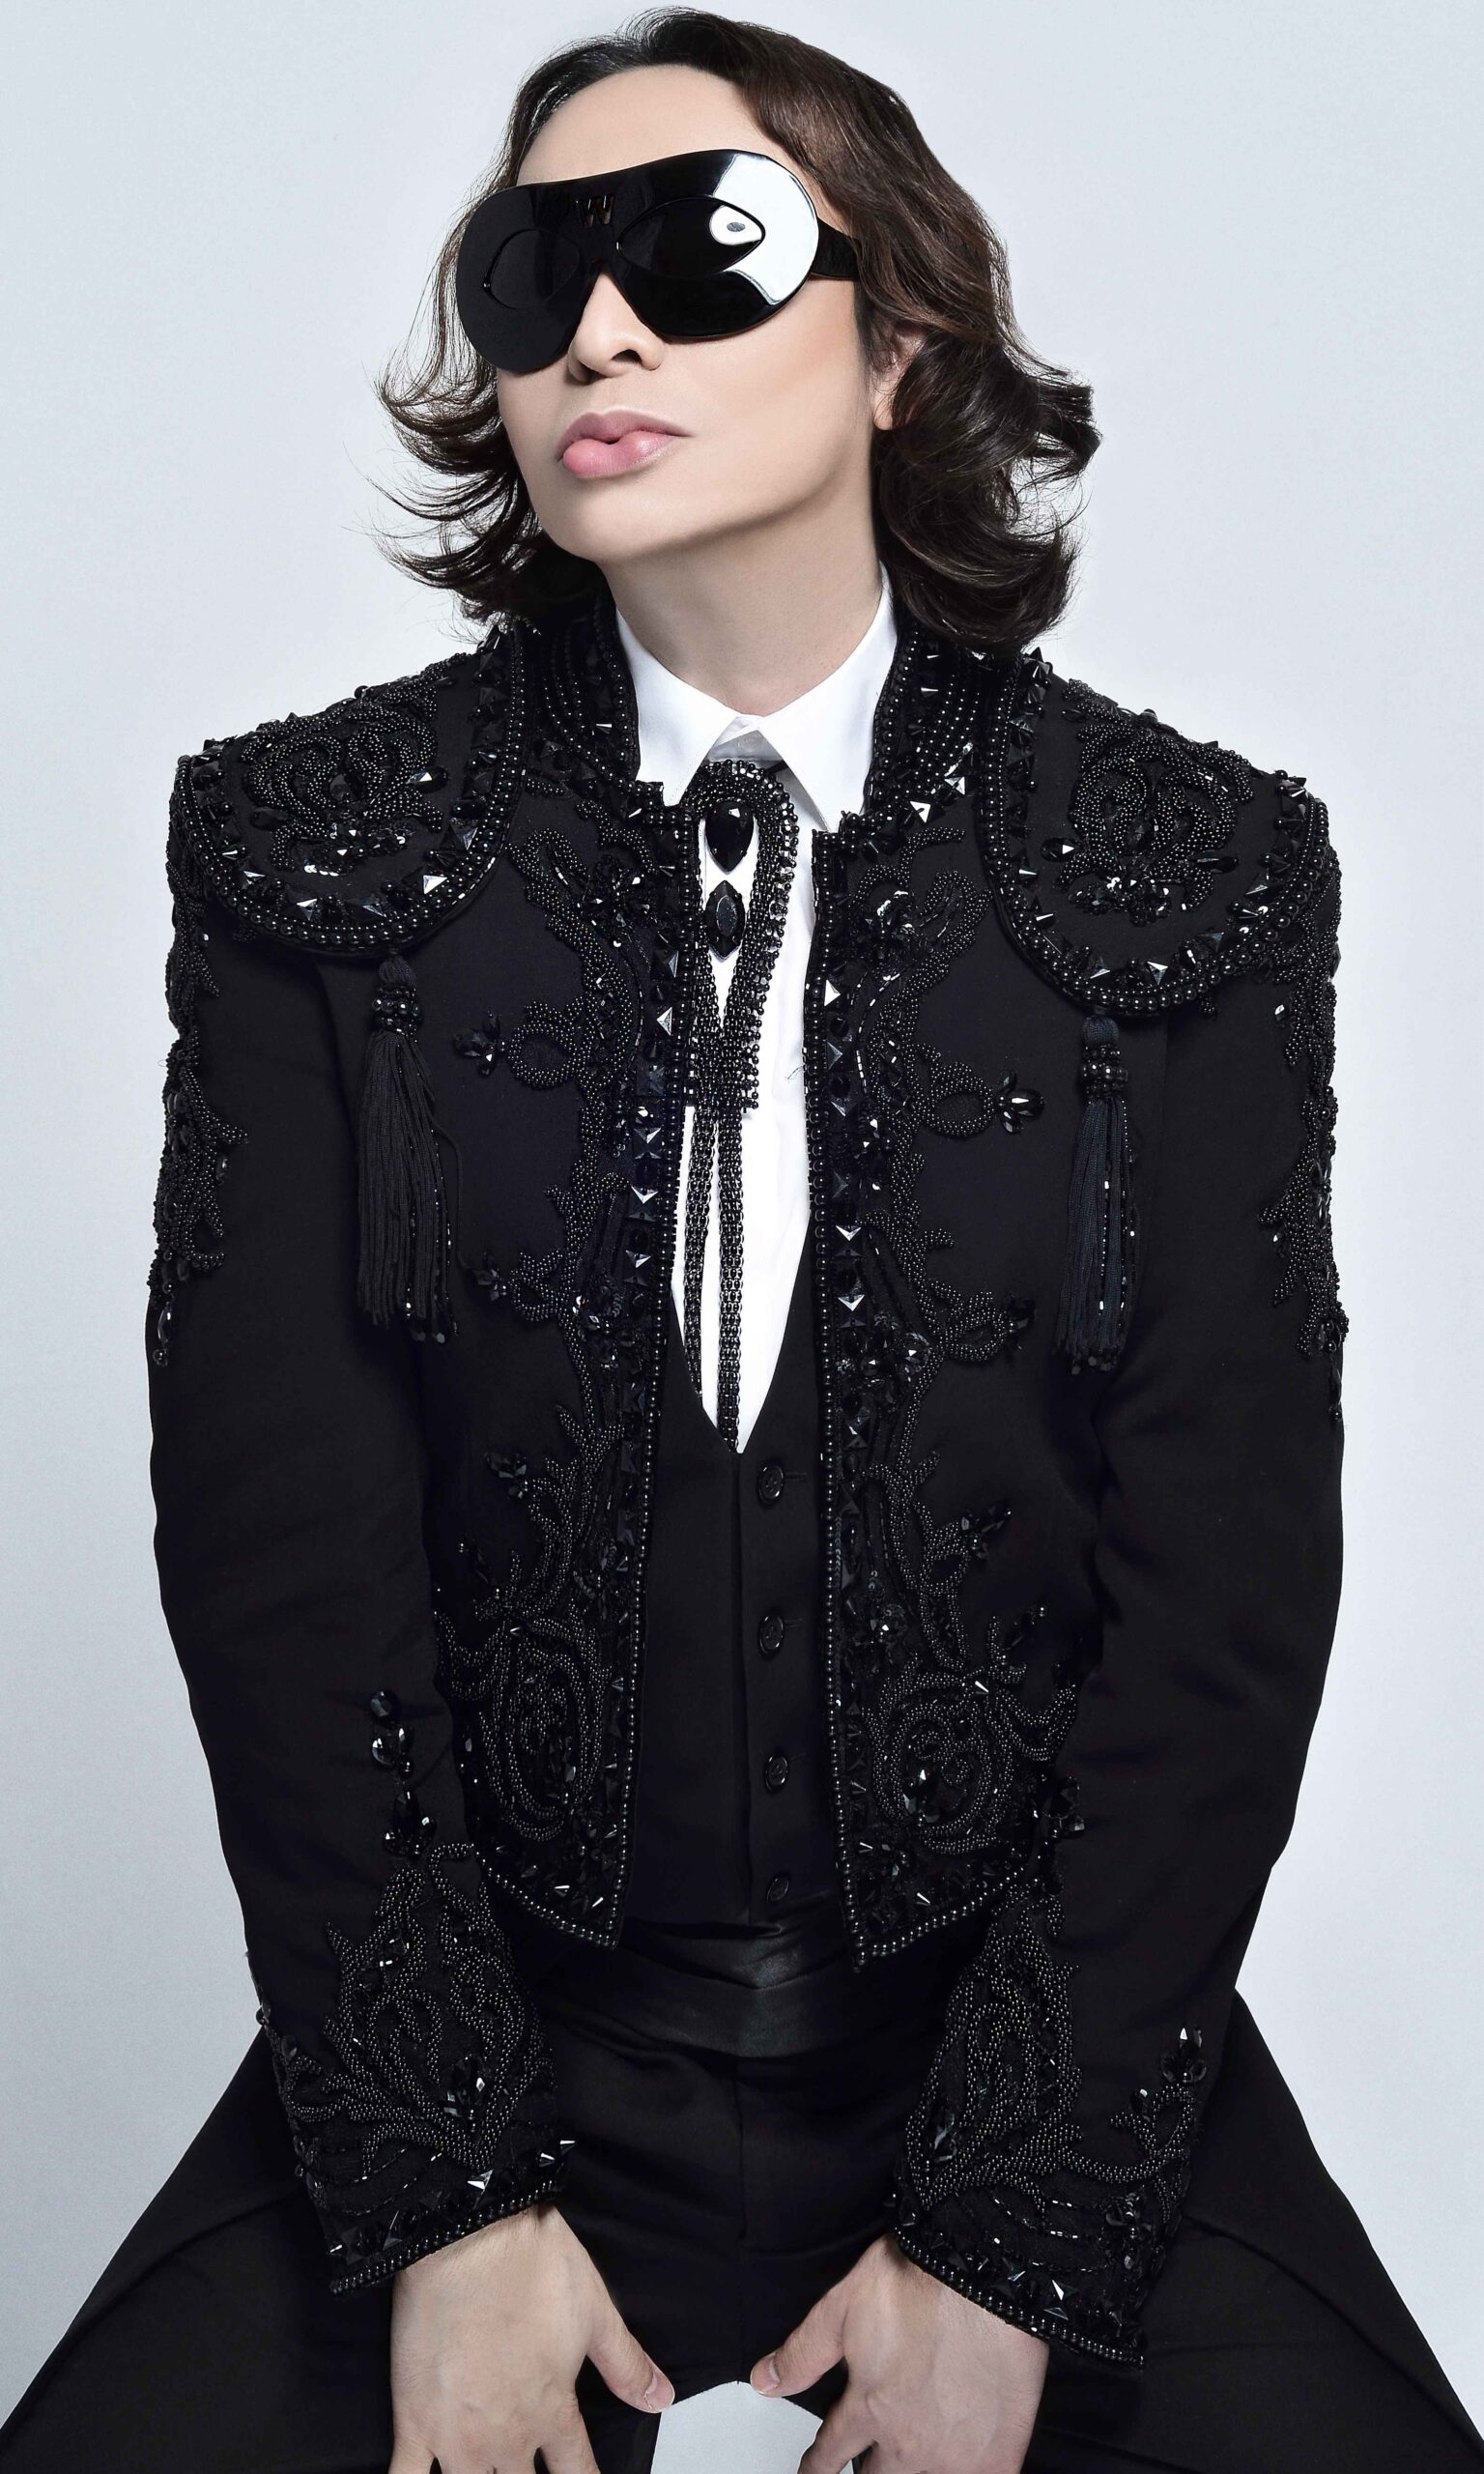 Notable Alumni of the MEGA Young Designers Competition MICHAEL CINCO